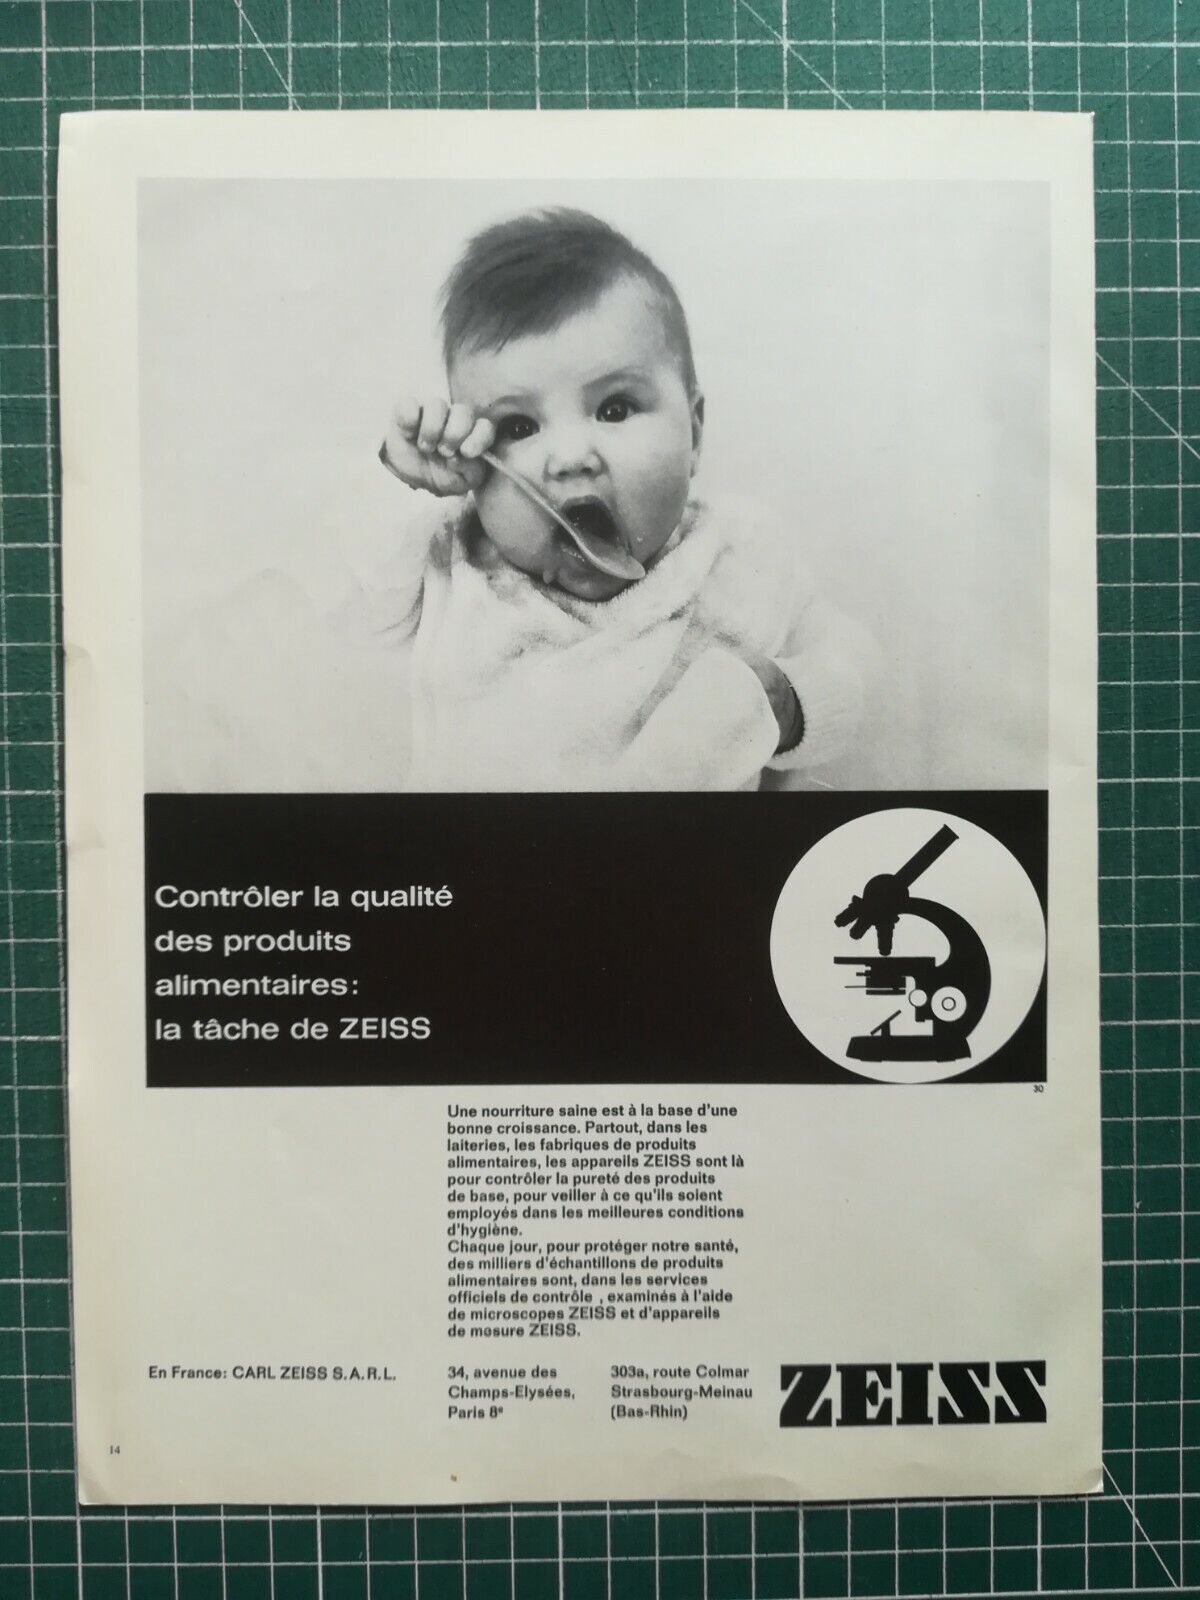 1068 circa 1960 Zeiss Microscope Advertising - Eating Baby